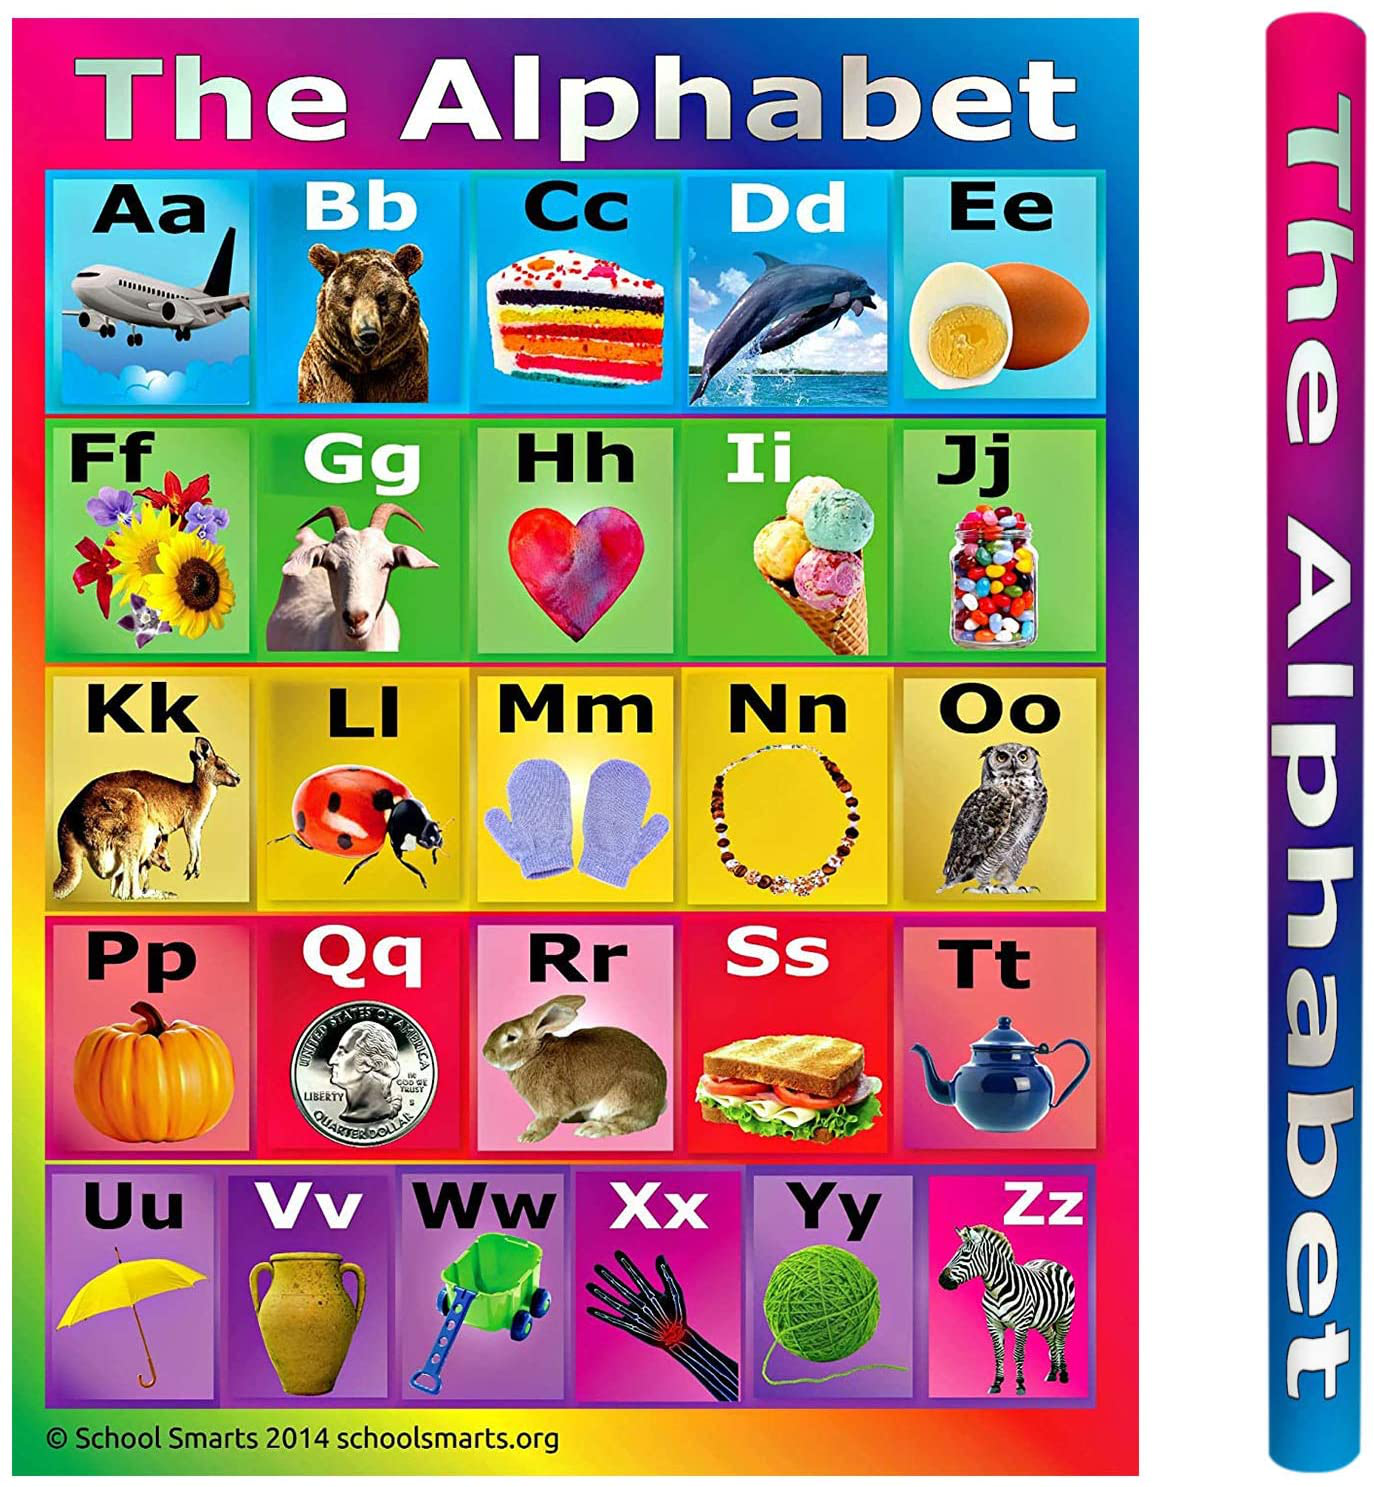 17” X 22” School Smarts Laminated ABC Alphabet Wall Poster for Preschool Kids, Perfect for Back To School, Large Durable Display of the Alphabet + Informational Photos for Use in Homeschool or Classroom Settings